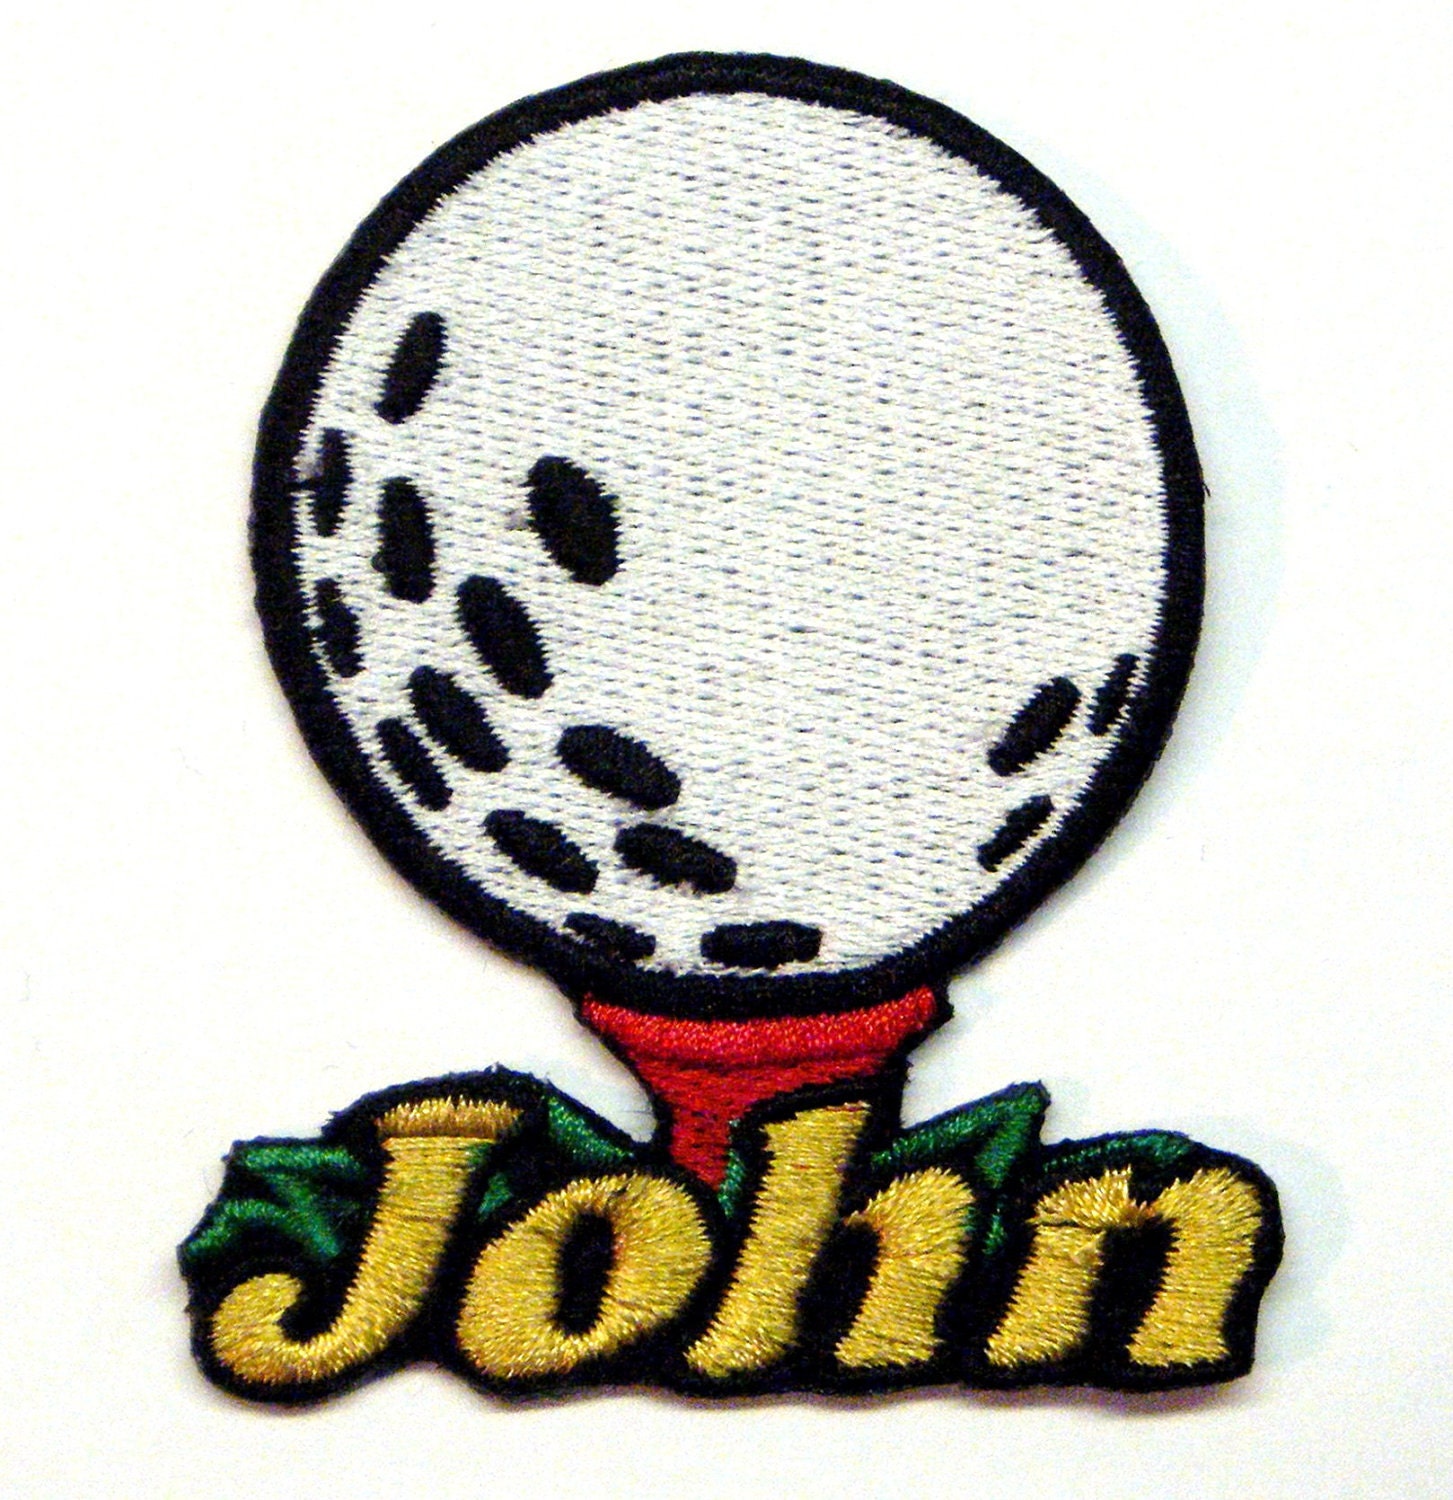  Golf Embroidered Iron On Patches Golf Shirt Bag Hats DIY :  Handmade Products